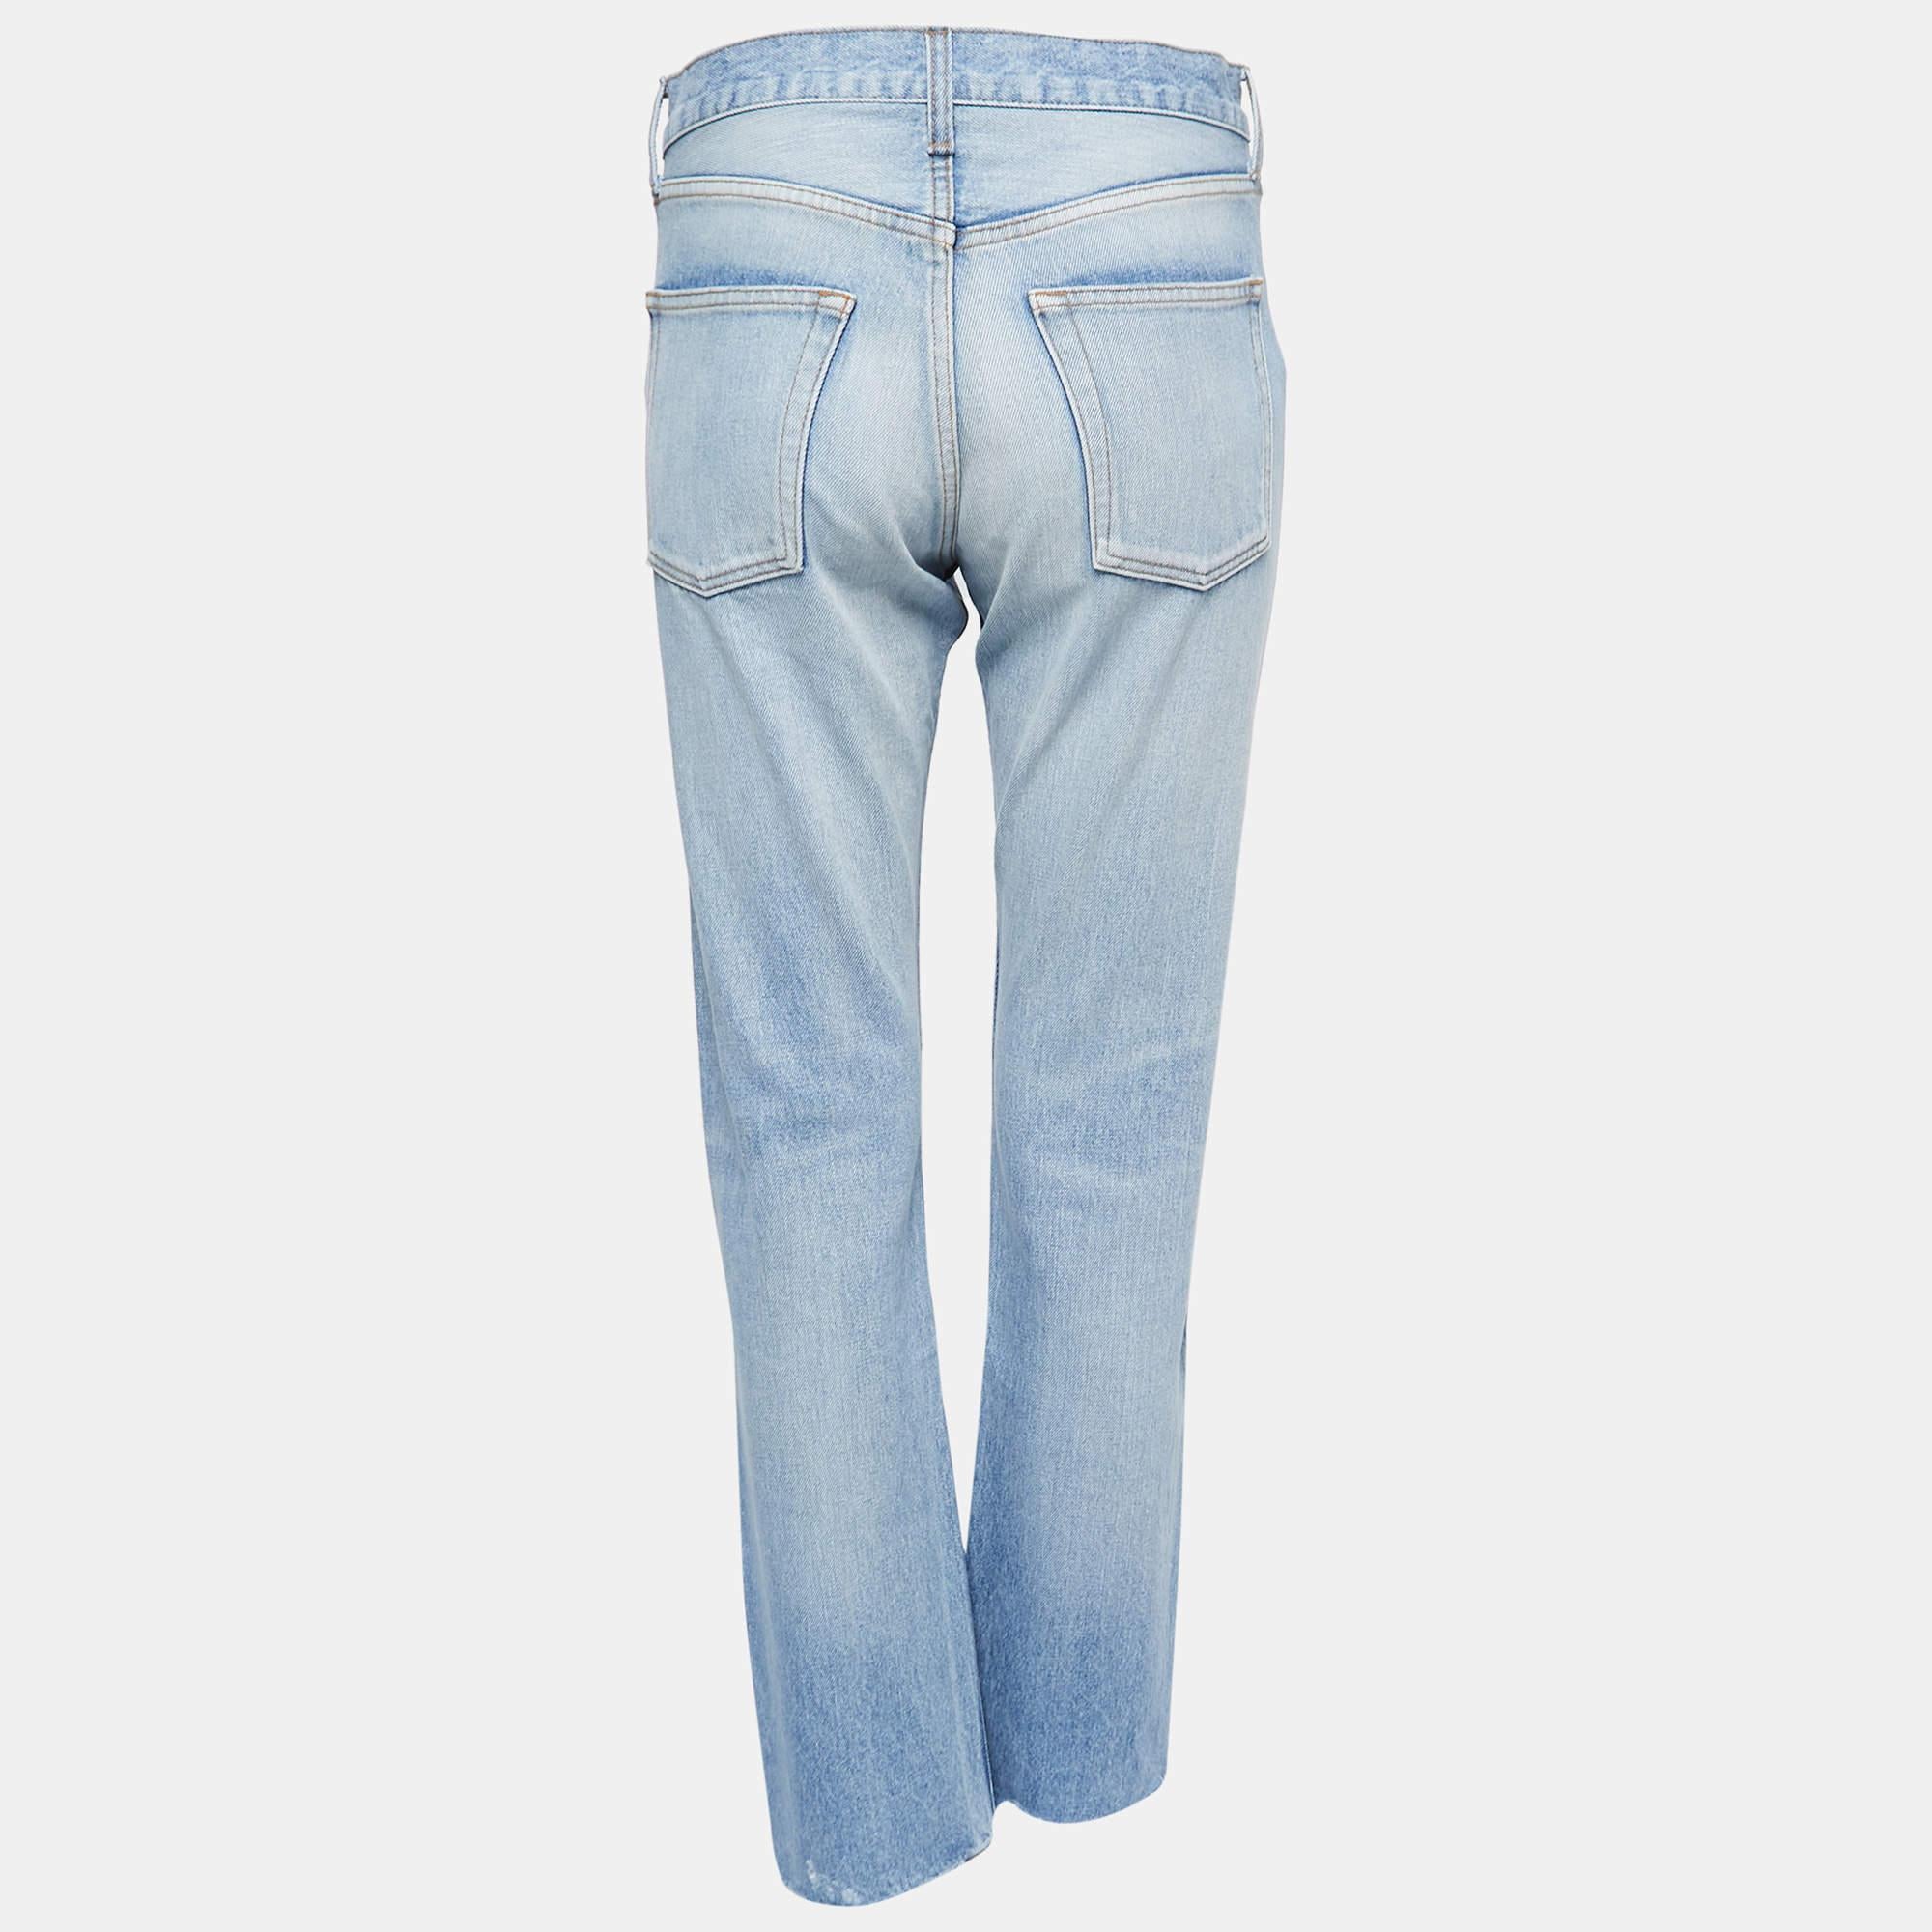 Tailored by Balenciaga, these jeans lend a chic, classy touch to your ensemble. They are made to offer maximum comfort without compromising on style. This richly-created piece will certainly make you look ultra-stylish.

